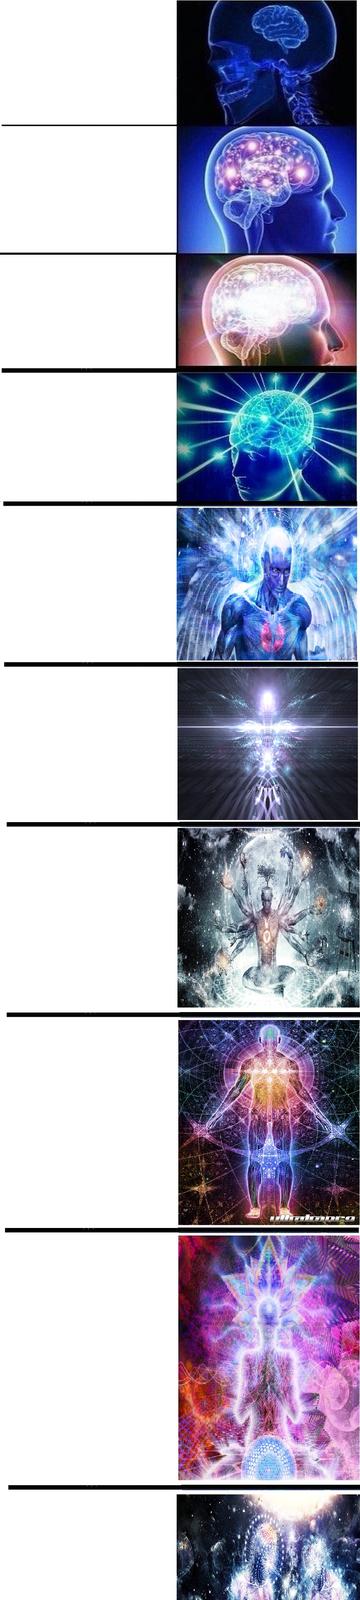 High Quality Extreme Expanding Mind Blank Meme Template